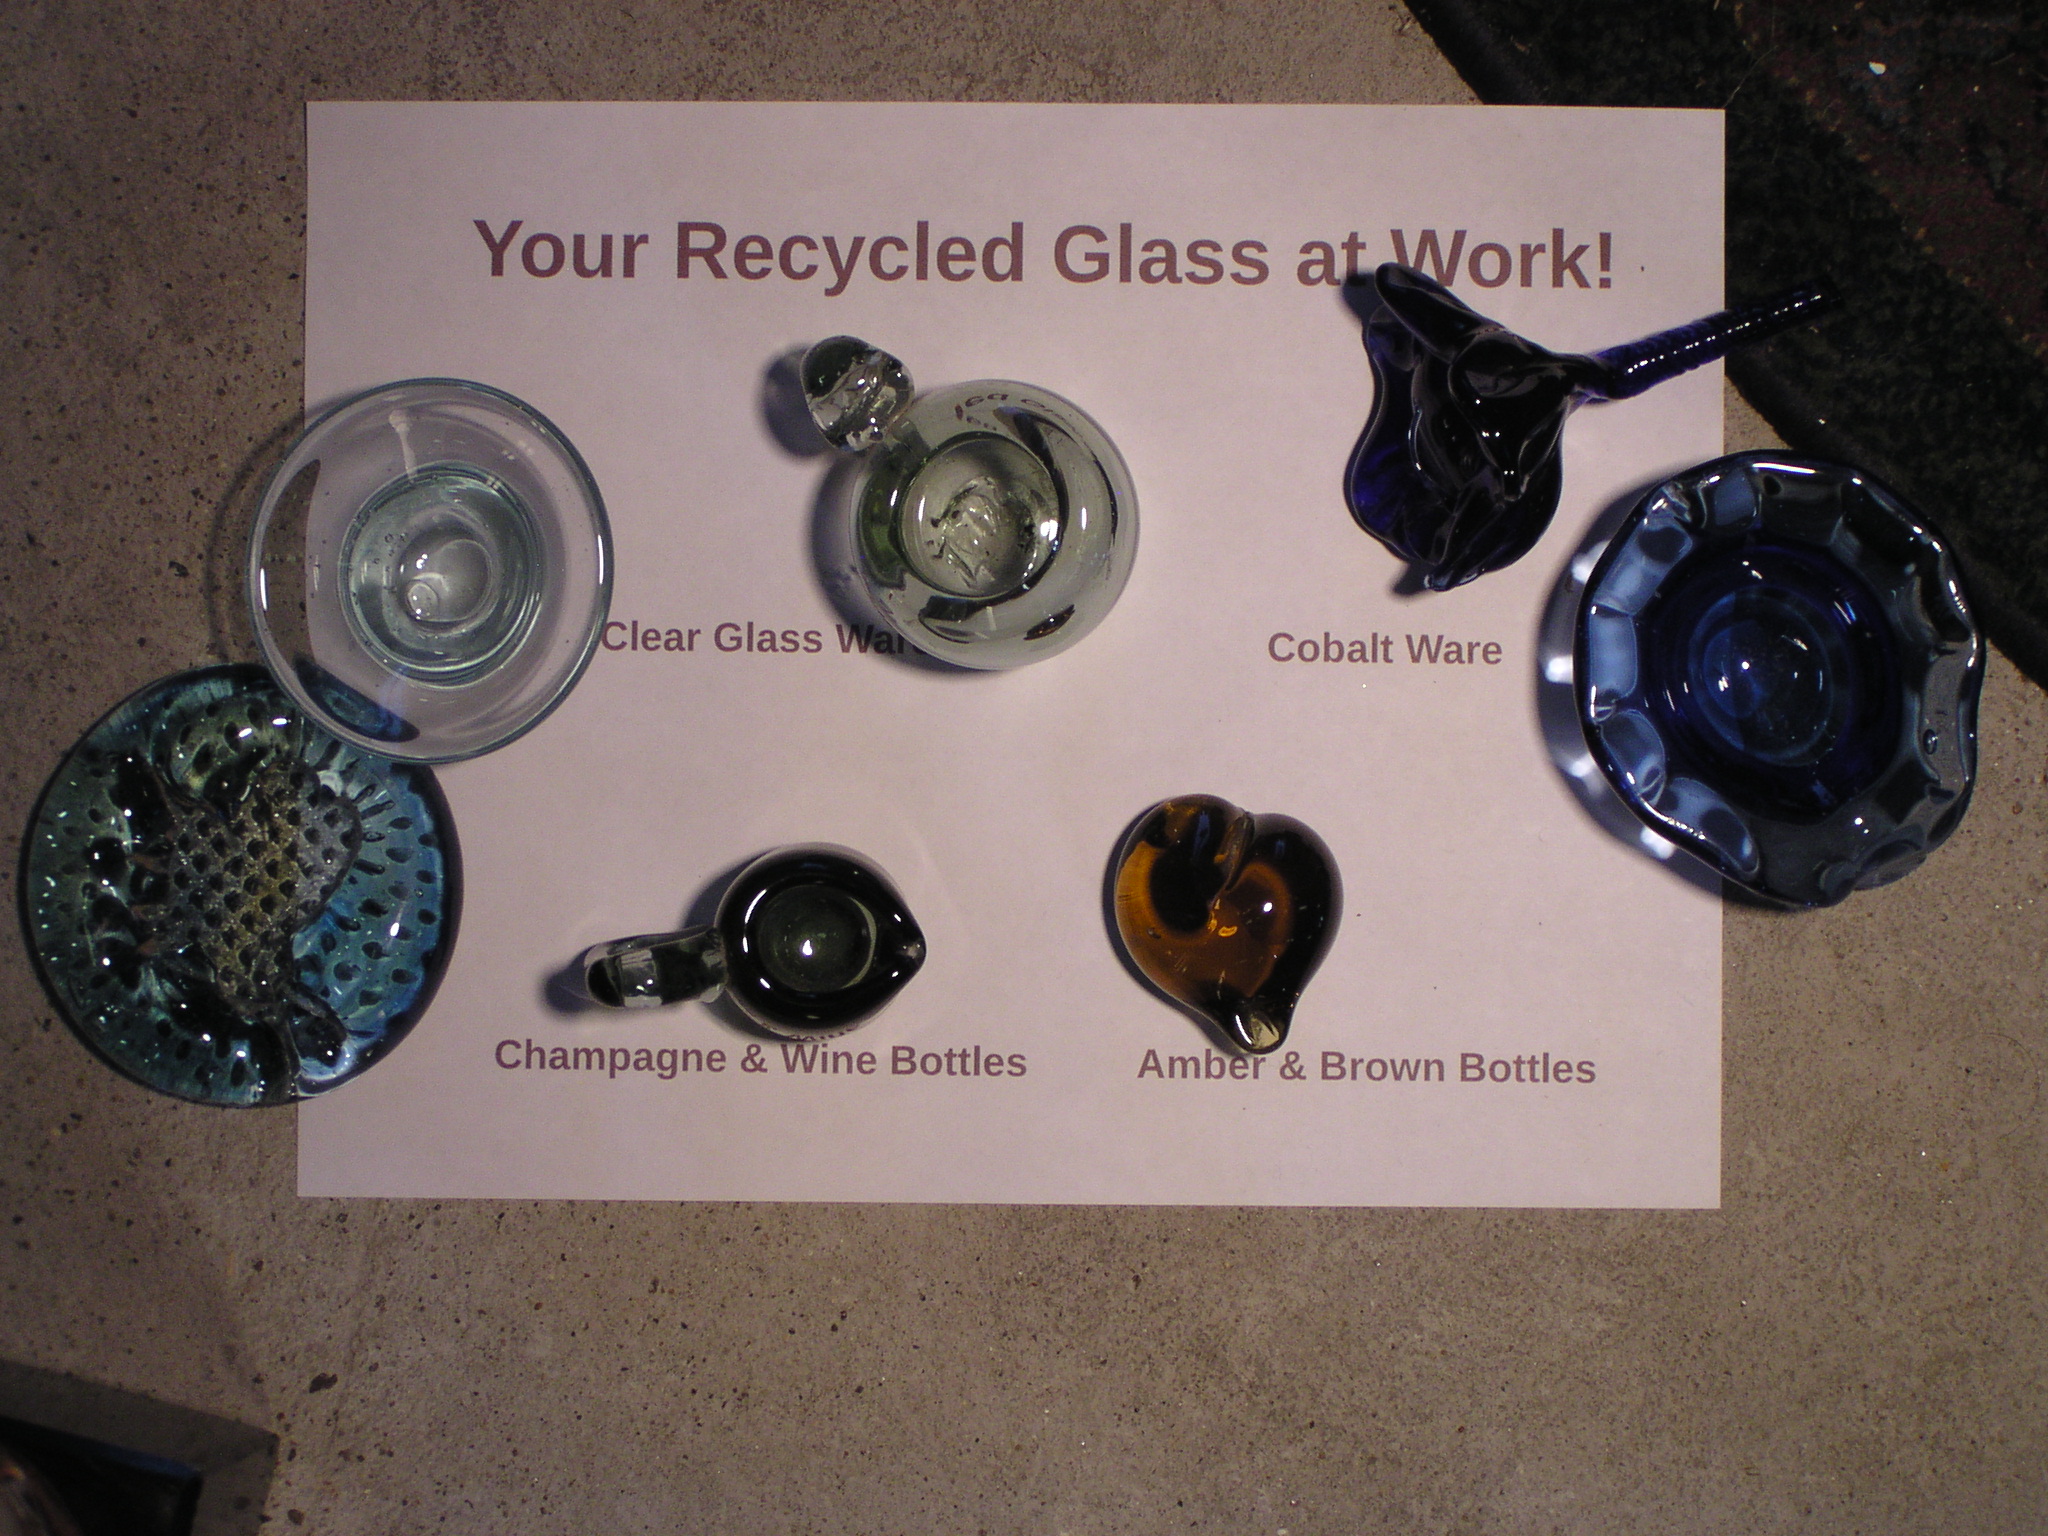 Images of Recycled Glass